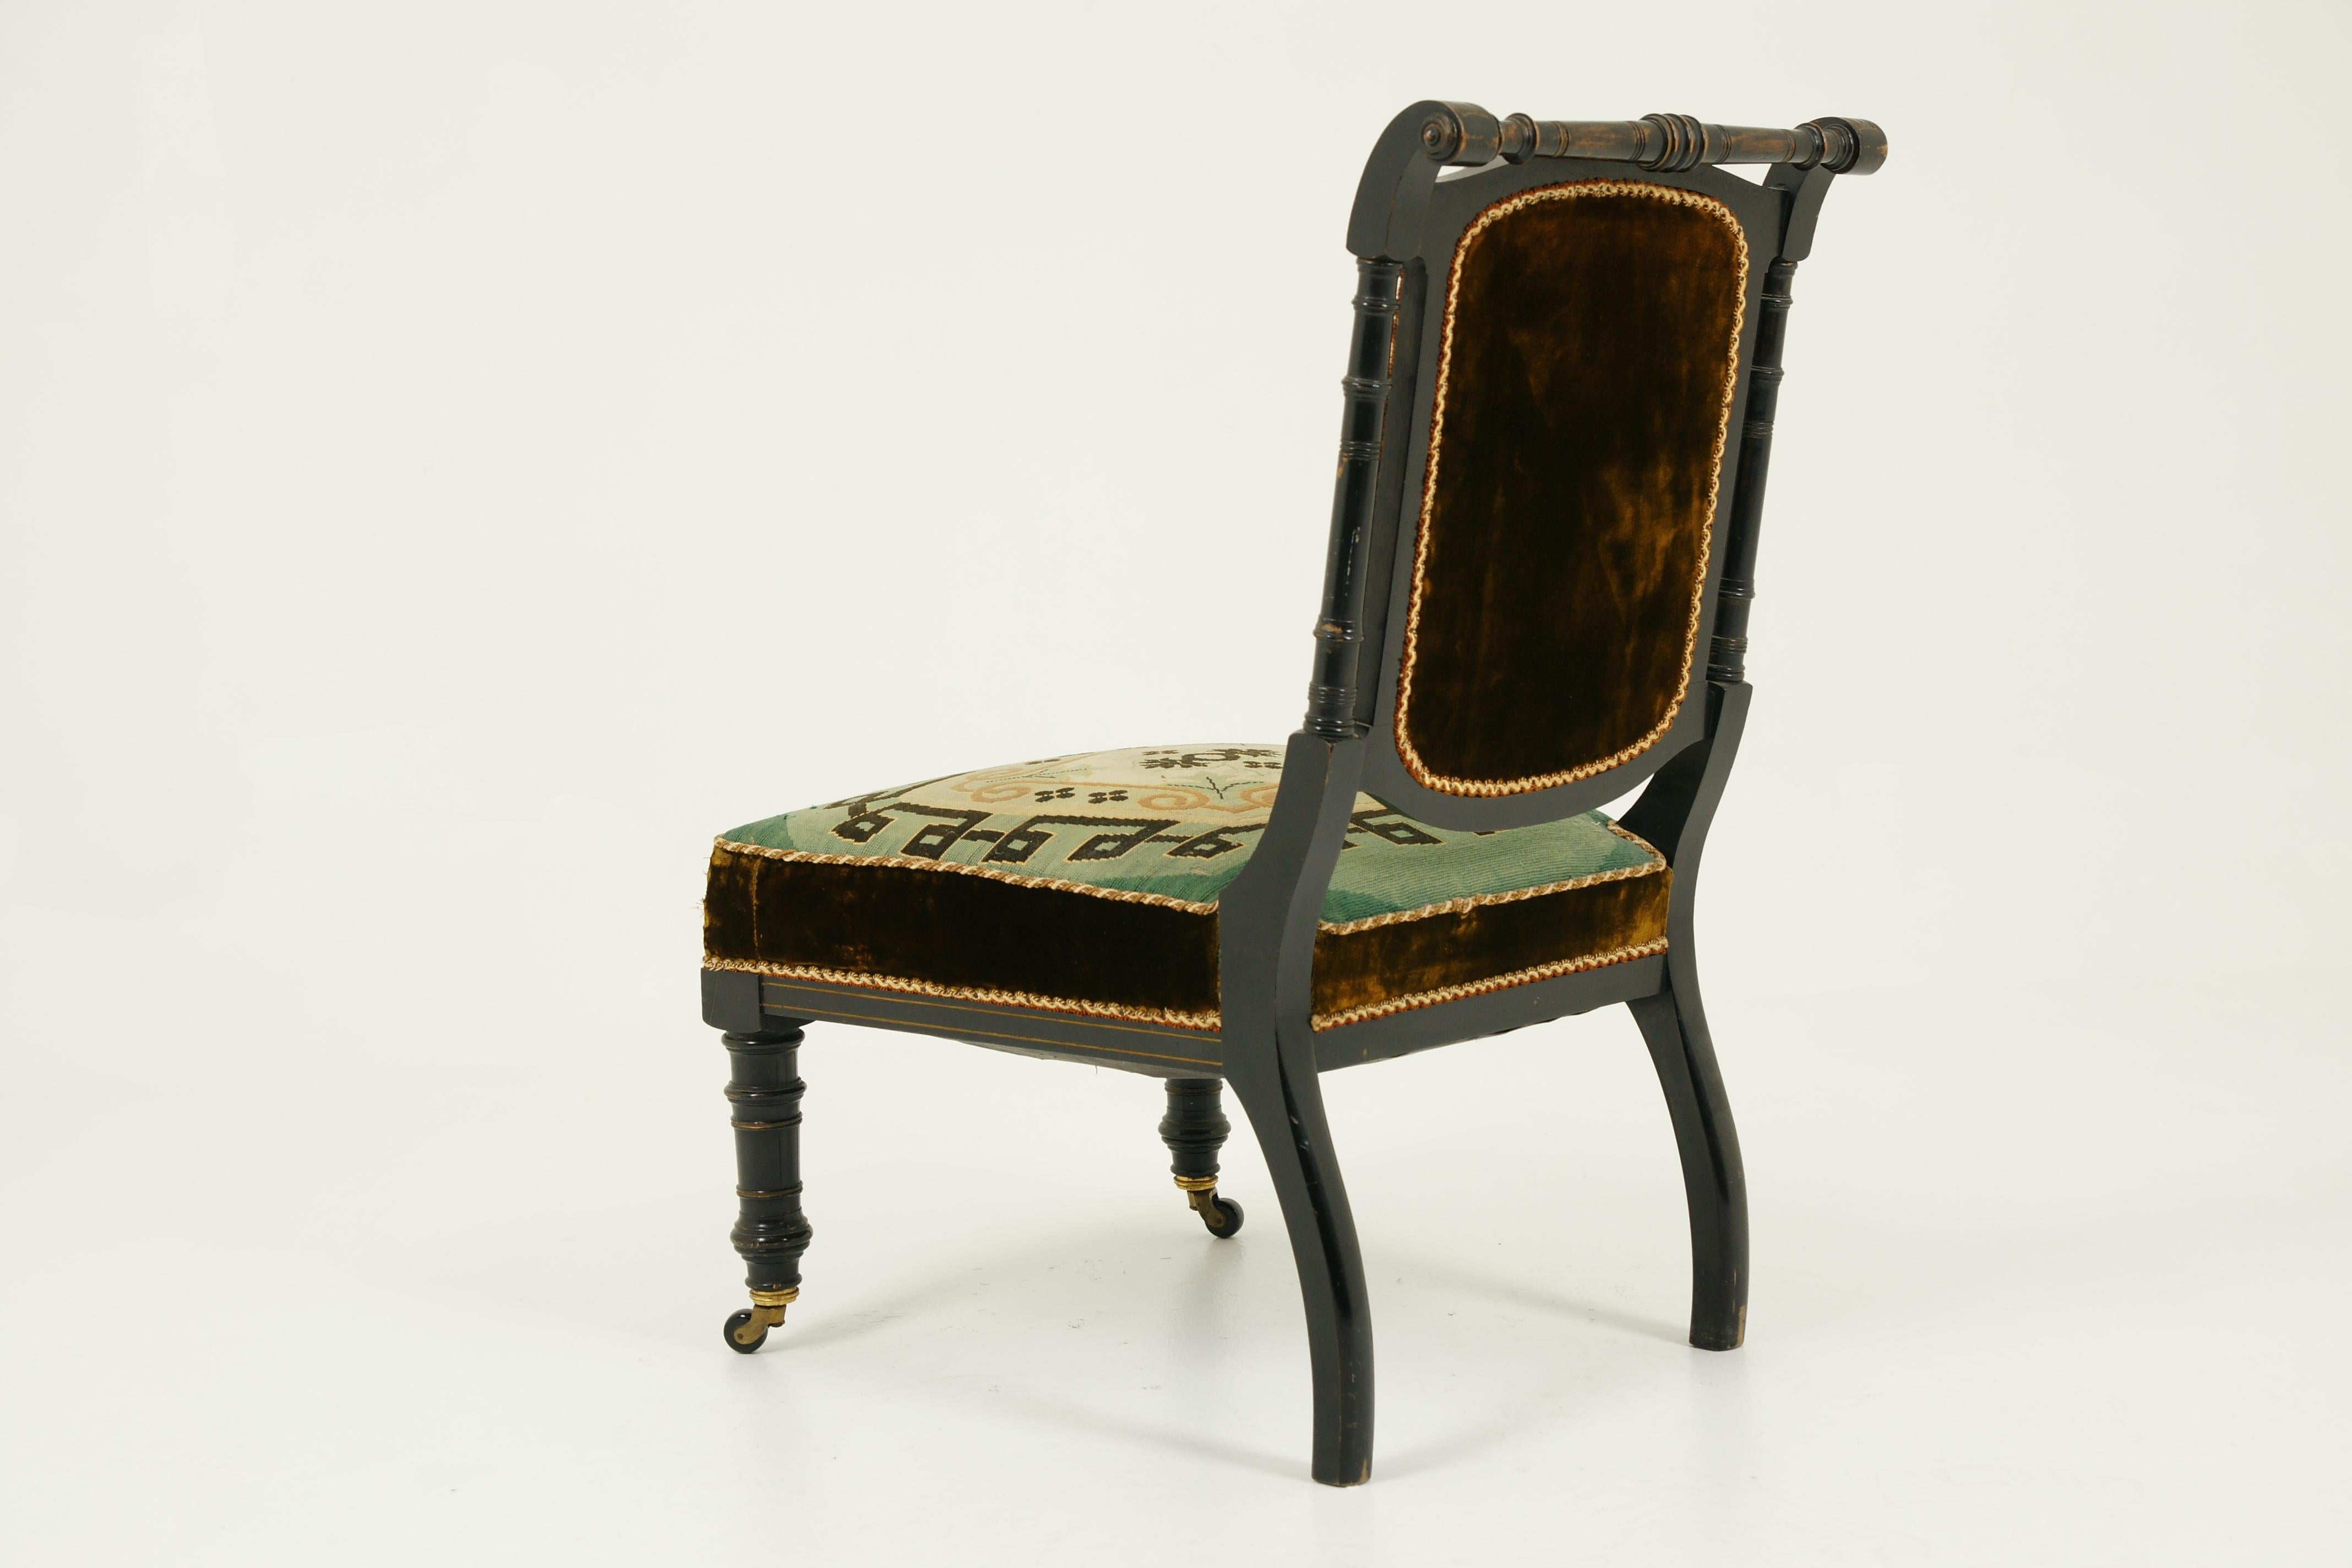 Hand-Crafted Antique Prayer Chair, Ebonized Chair, Aesthetic Movement, Prie Dieu, 1880, B1562